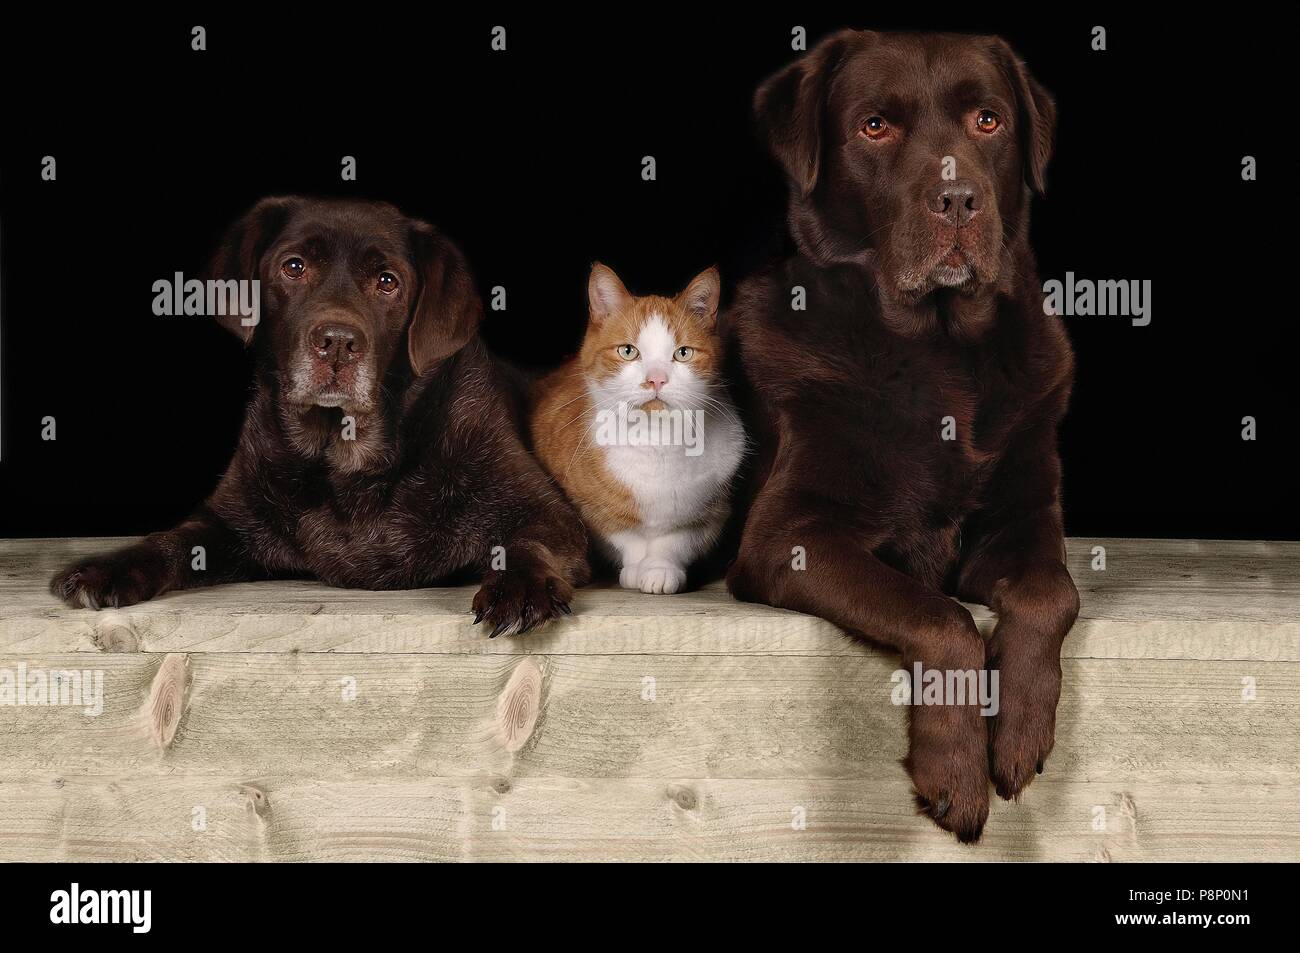 Dogs and cat. Stock Photo